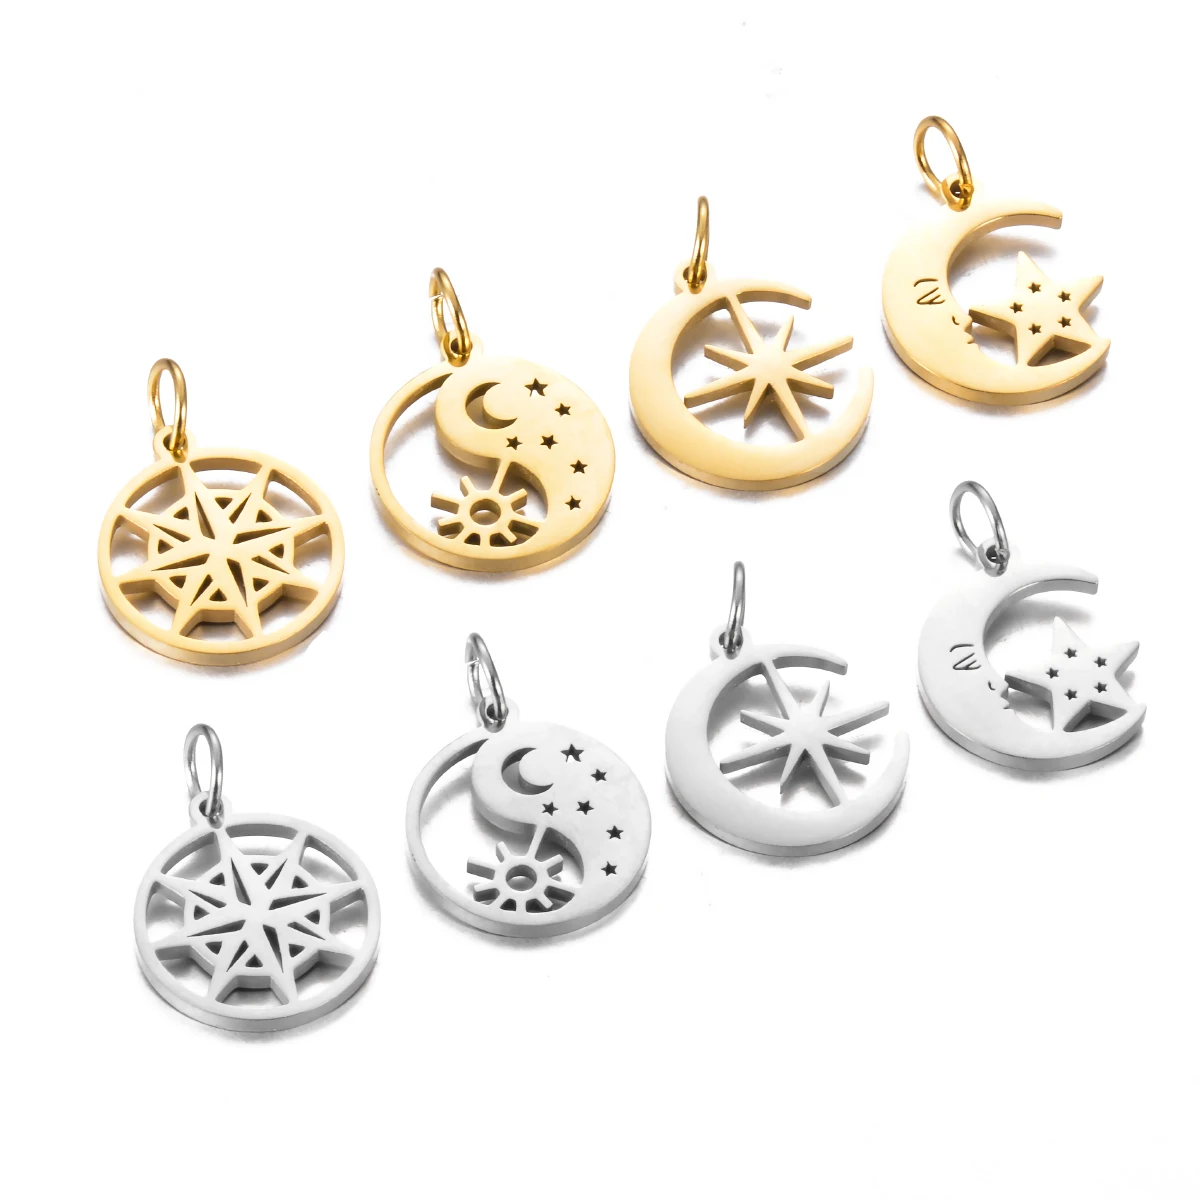 

10pcs Stainless Steel Sun Moon Star Charm Pendants for DIY Crafts Dangle Anklet Necklace Making Jewelry Gifts Accessories